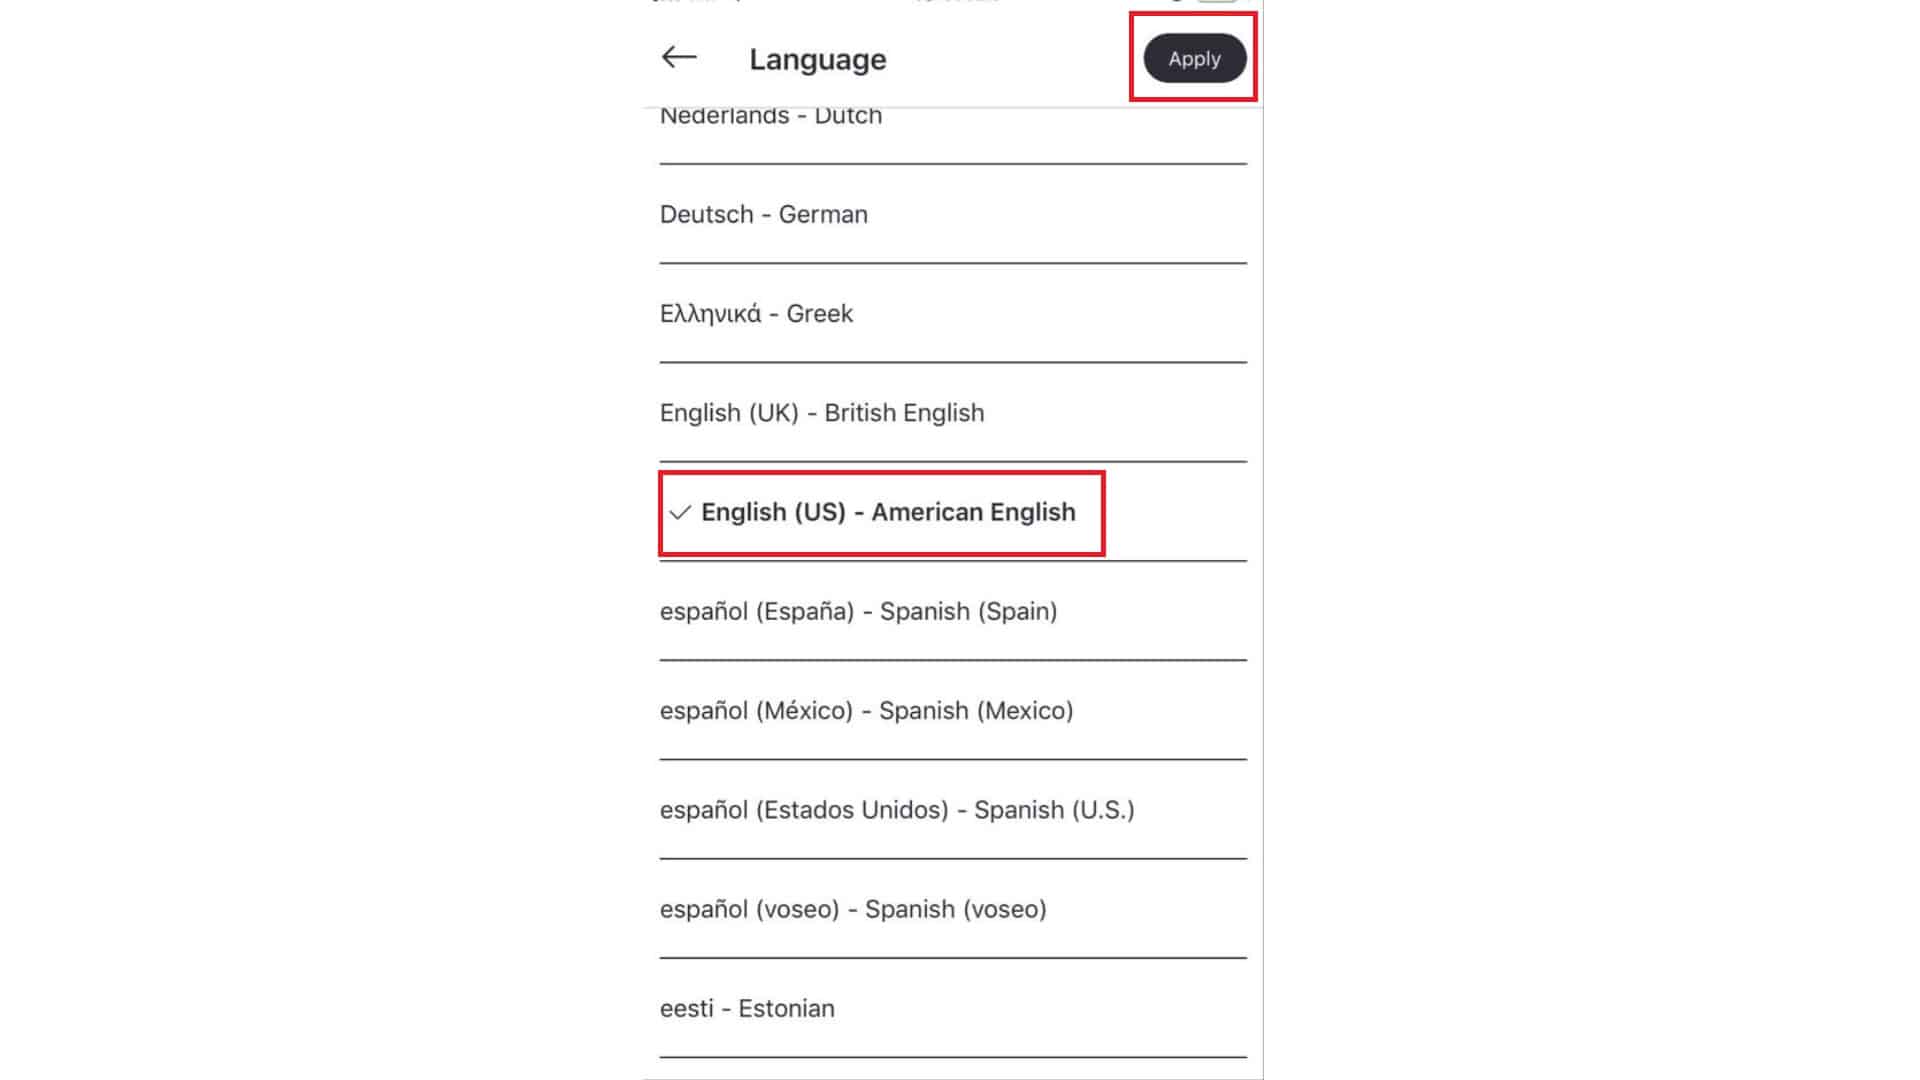 how-to-Change-Language-on-Skype-Guide-2020